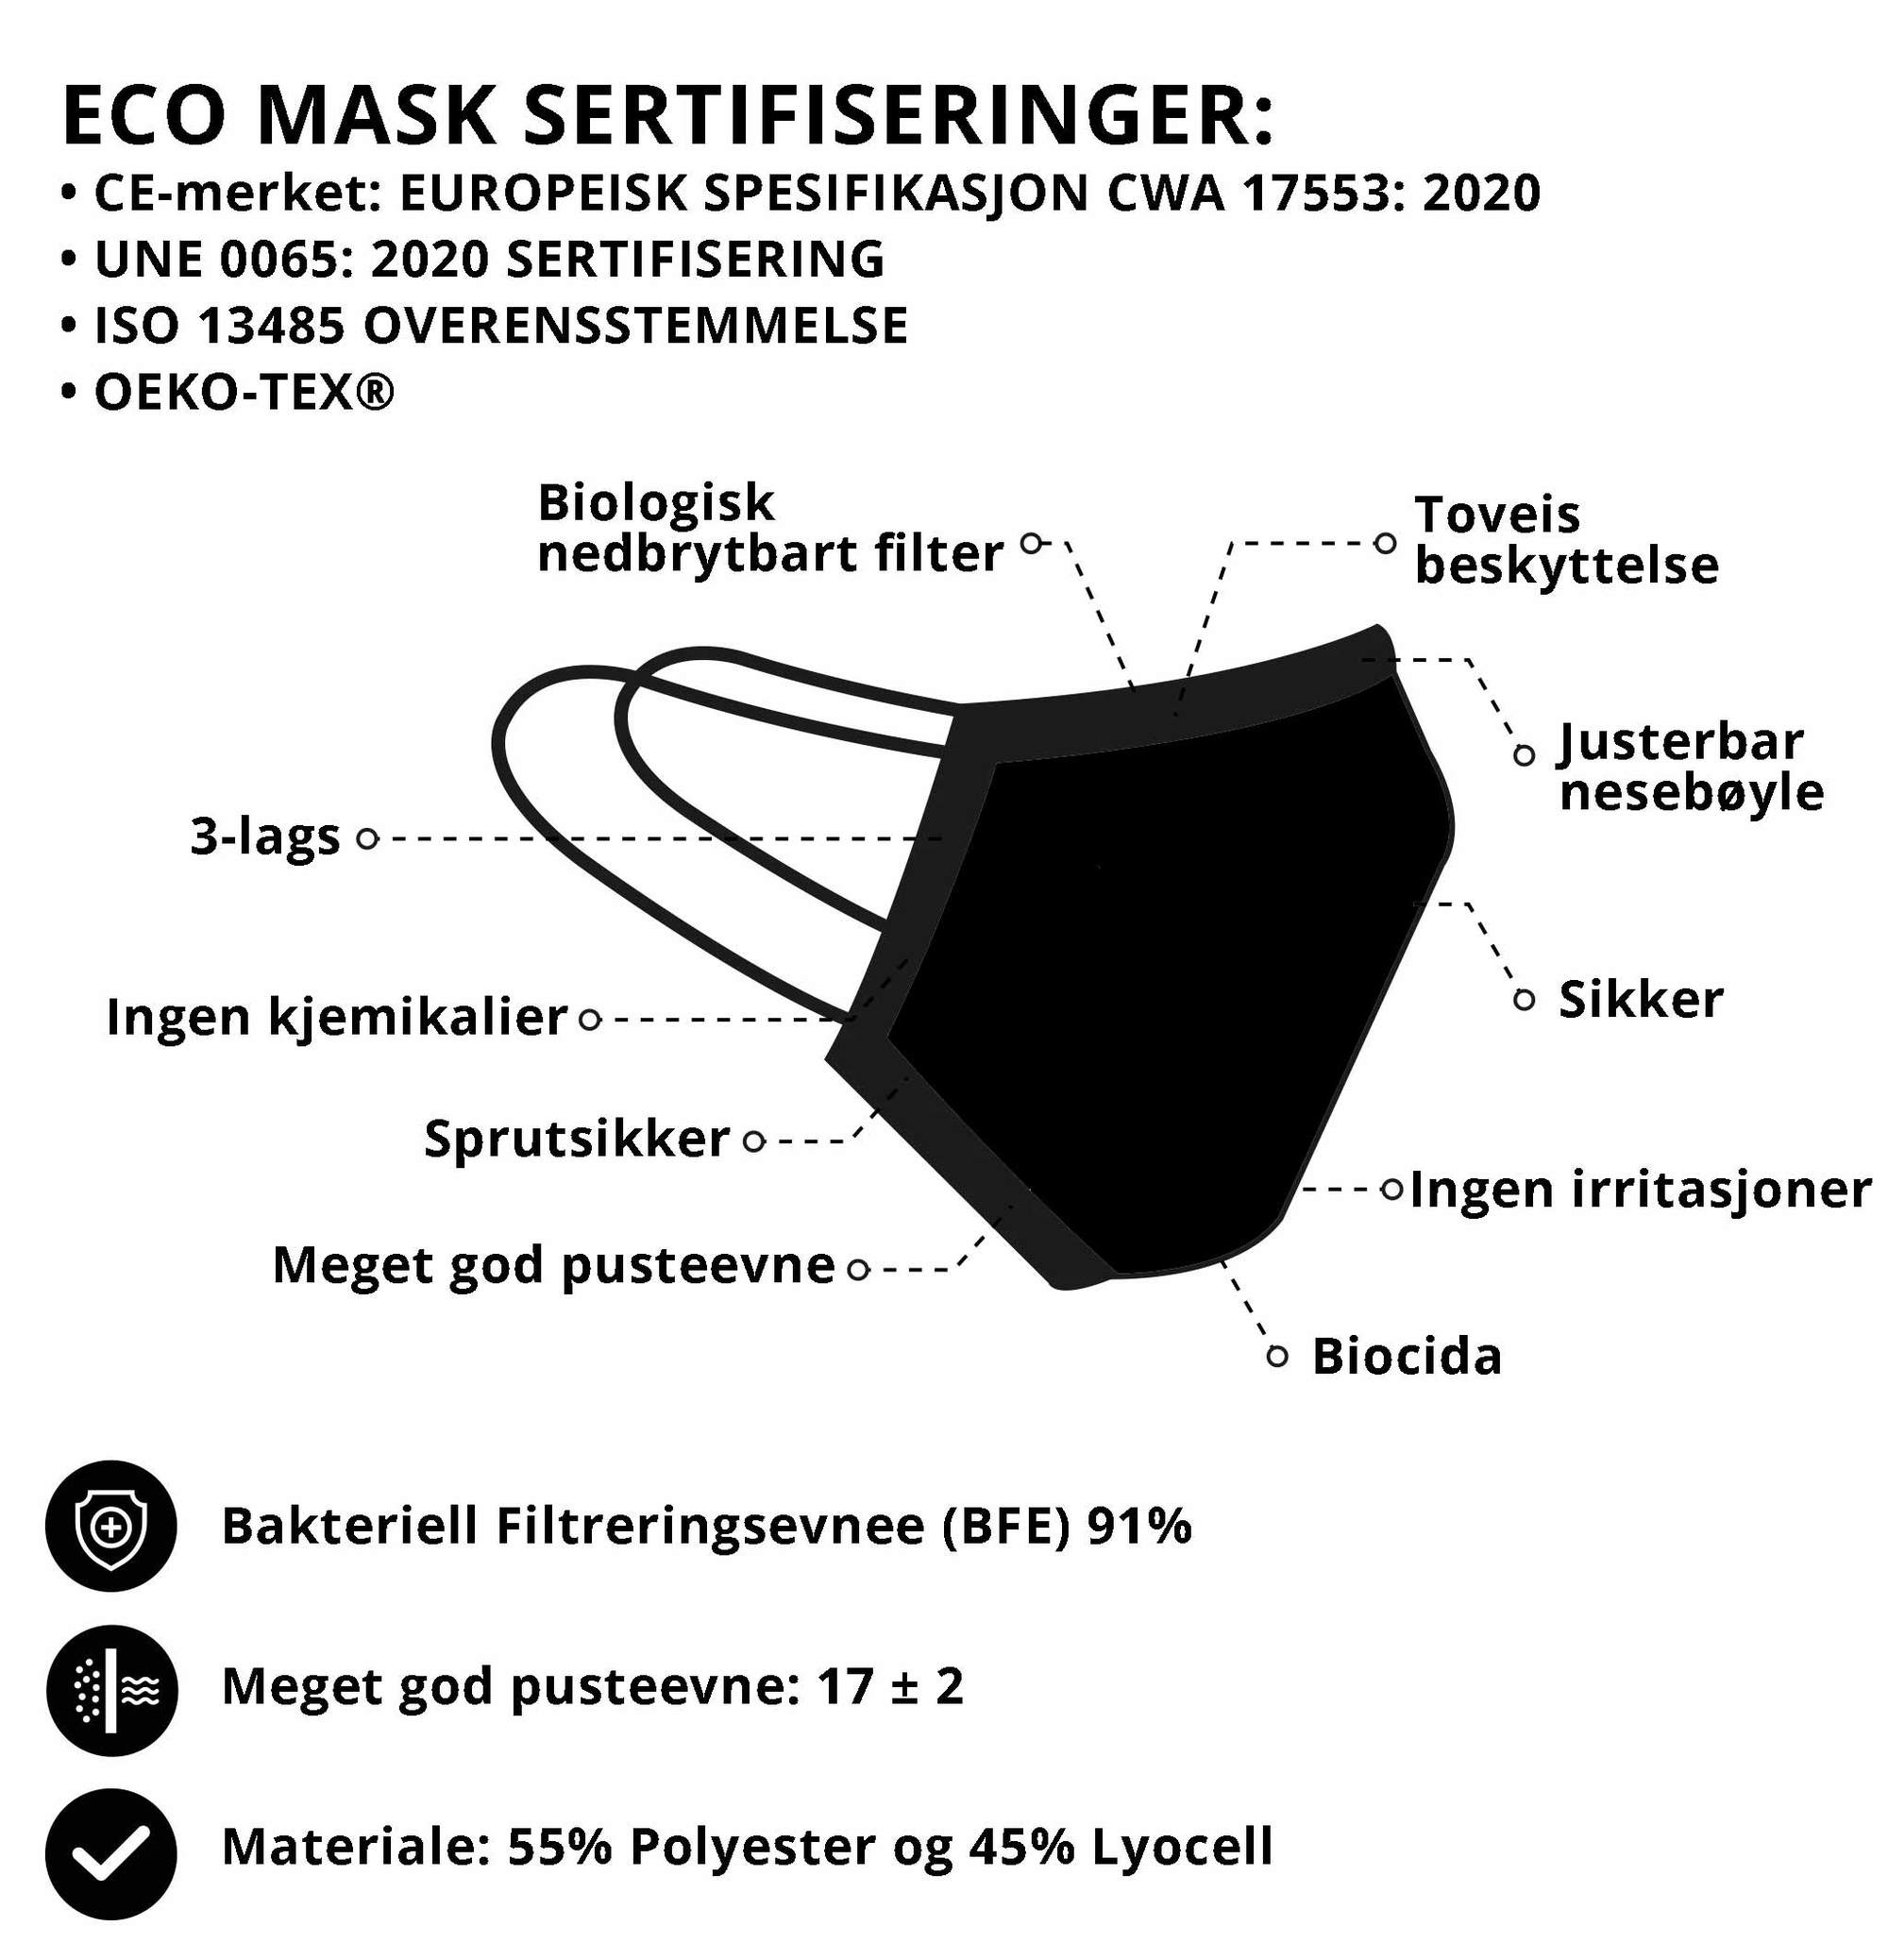 ECO mask, 3-layer washable cloth mask for children, manufactured according to European Specification CWA 17553: 2020